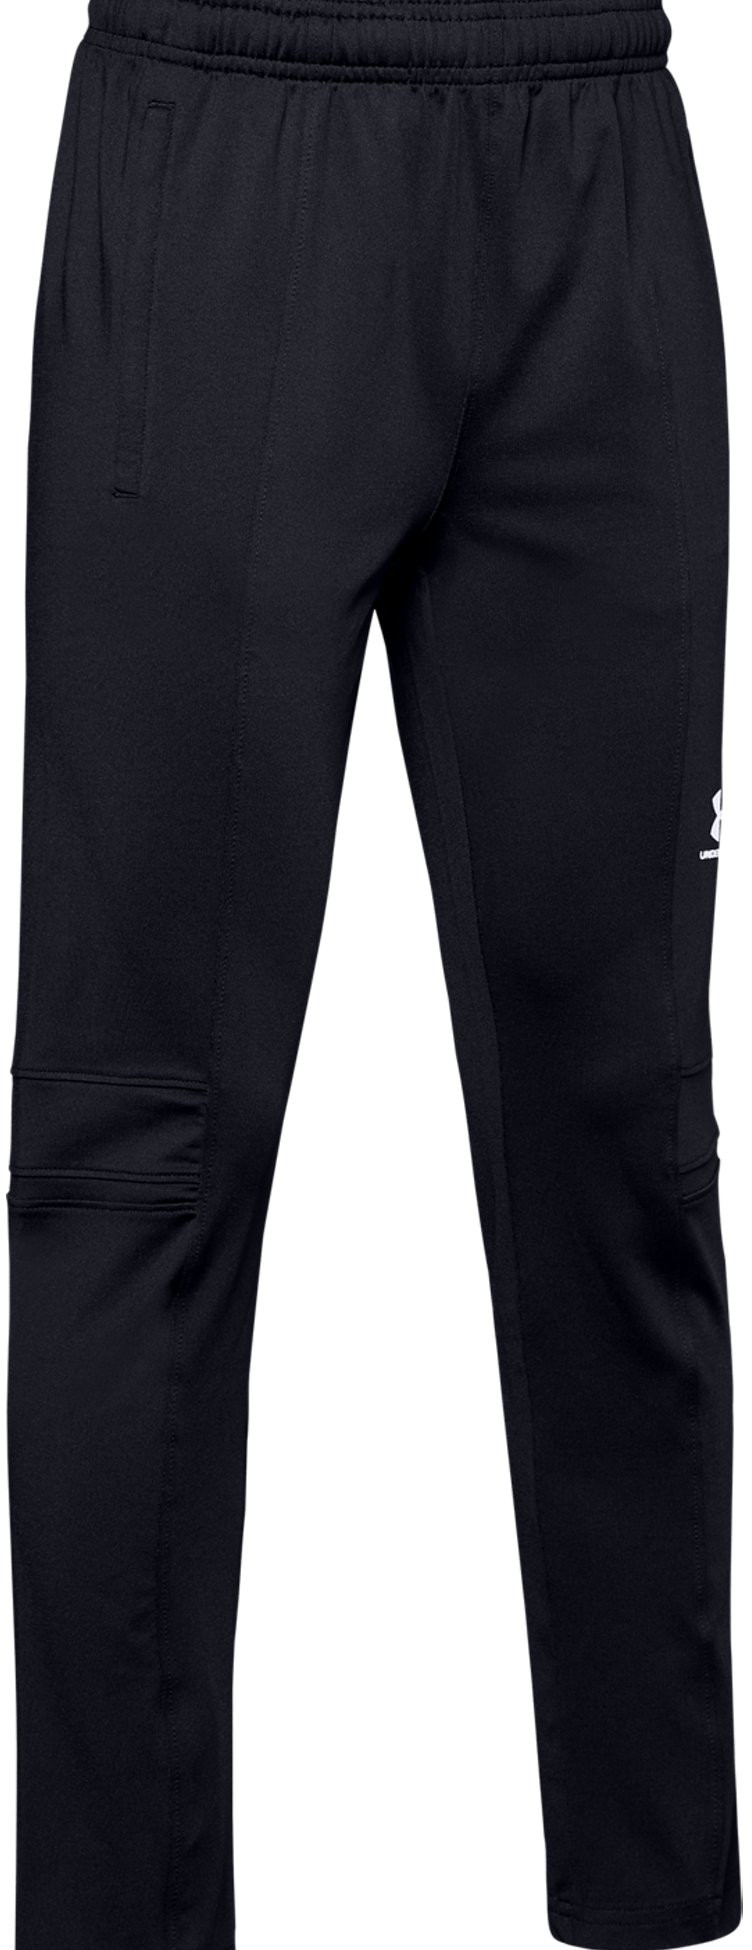 Under Armour Y Challenger III Train Pant Nadrágok